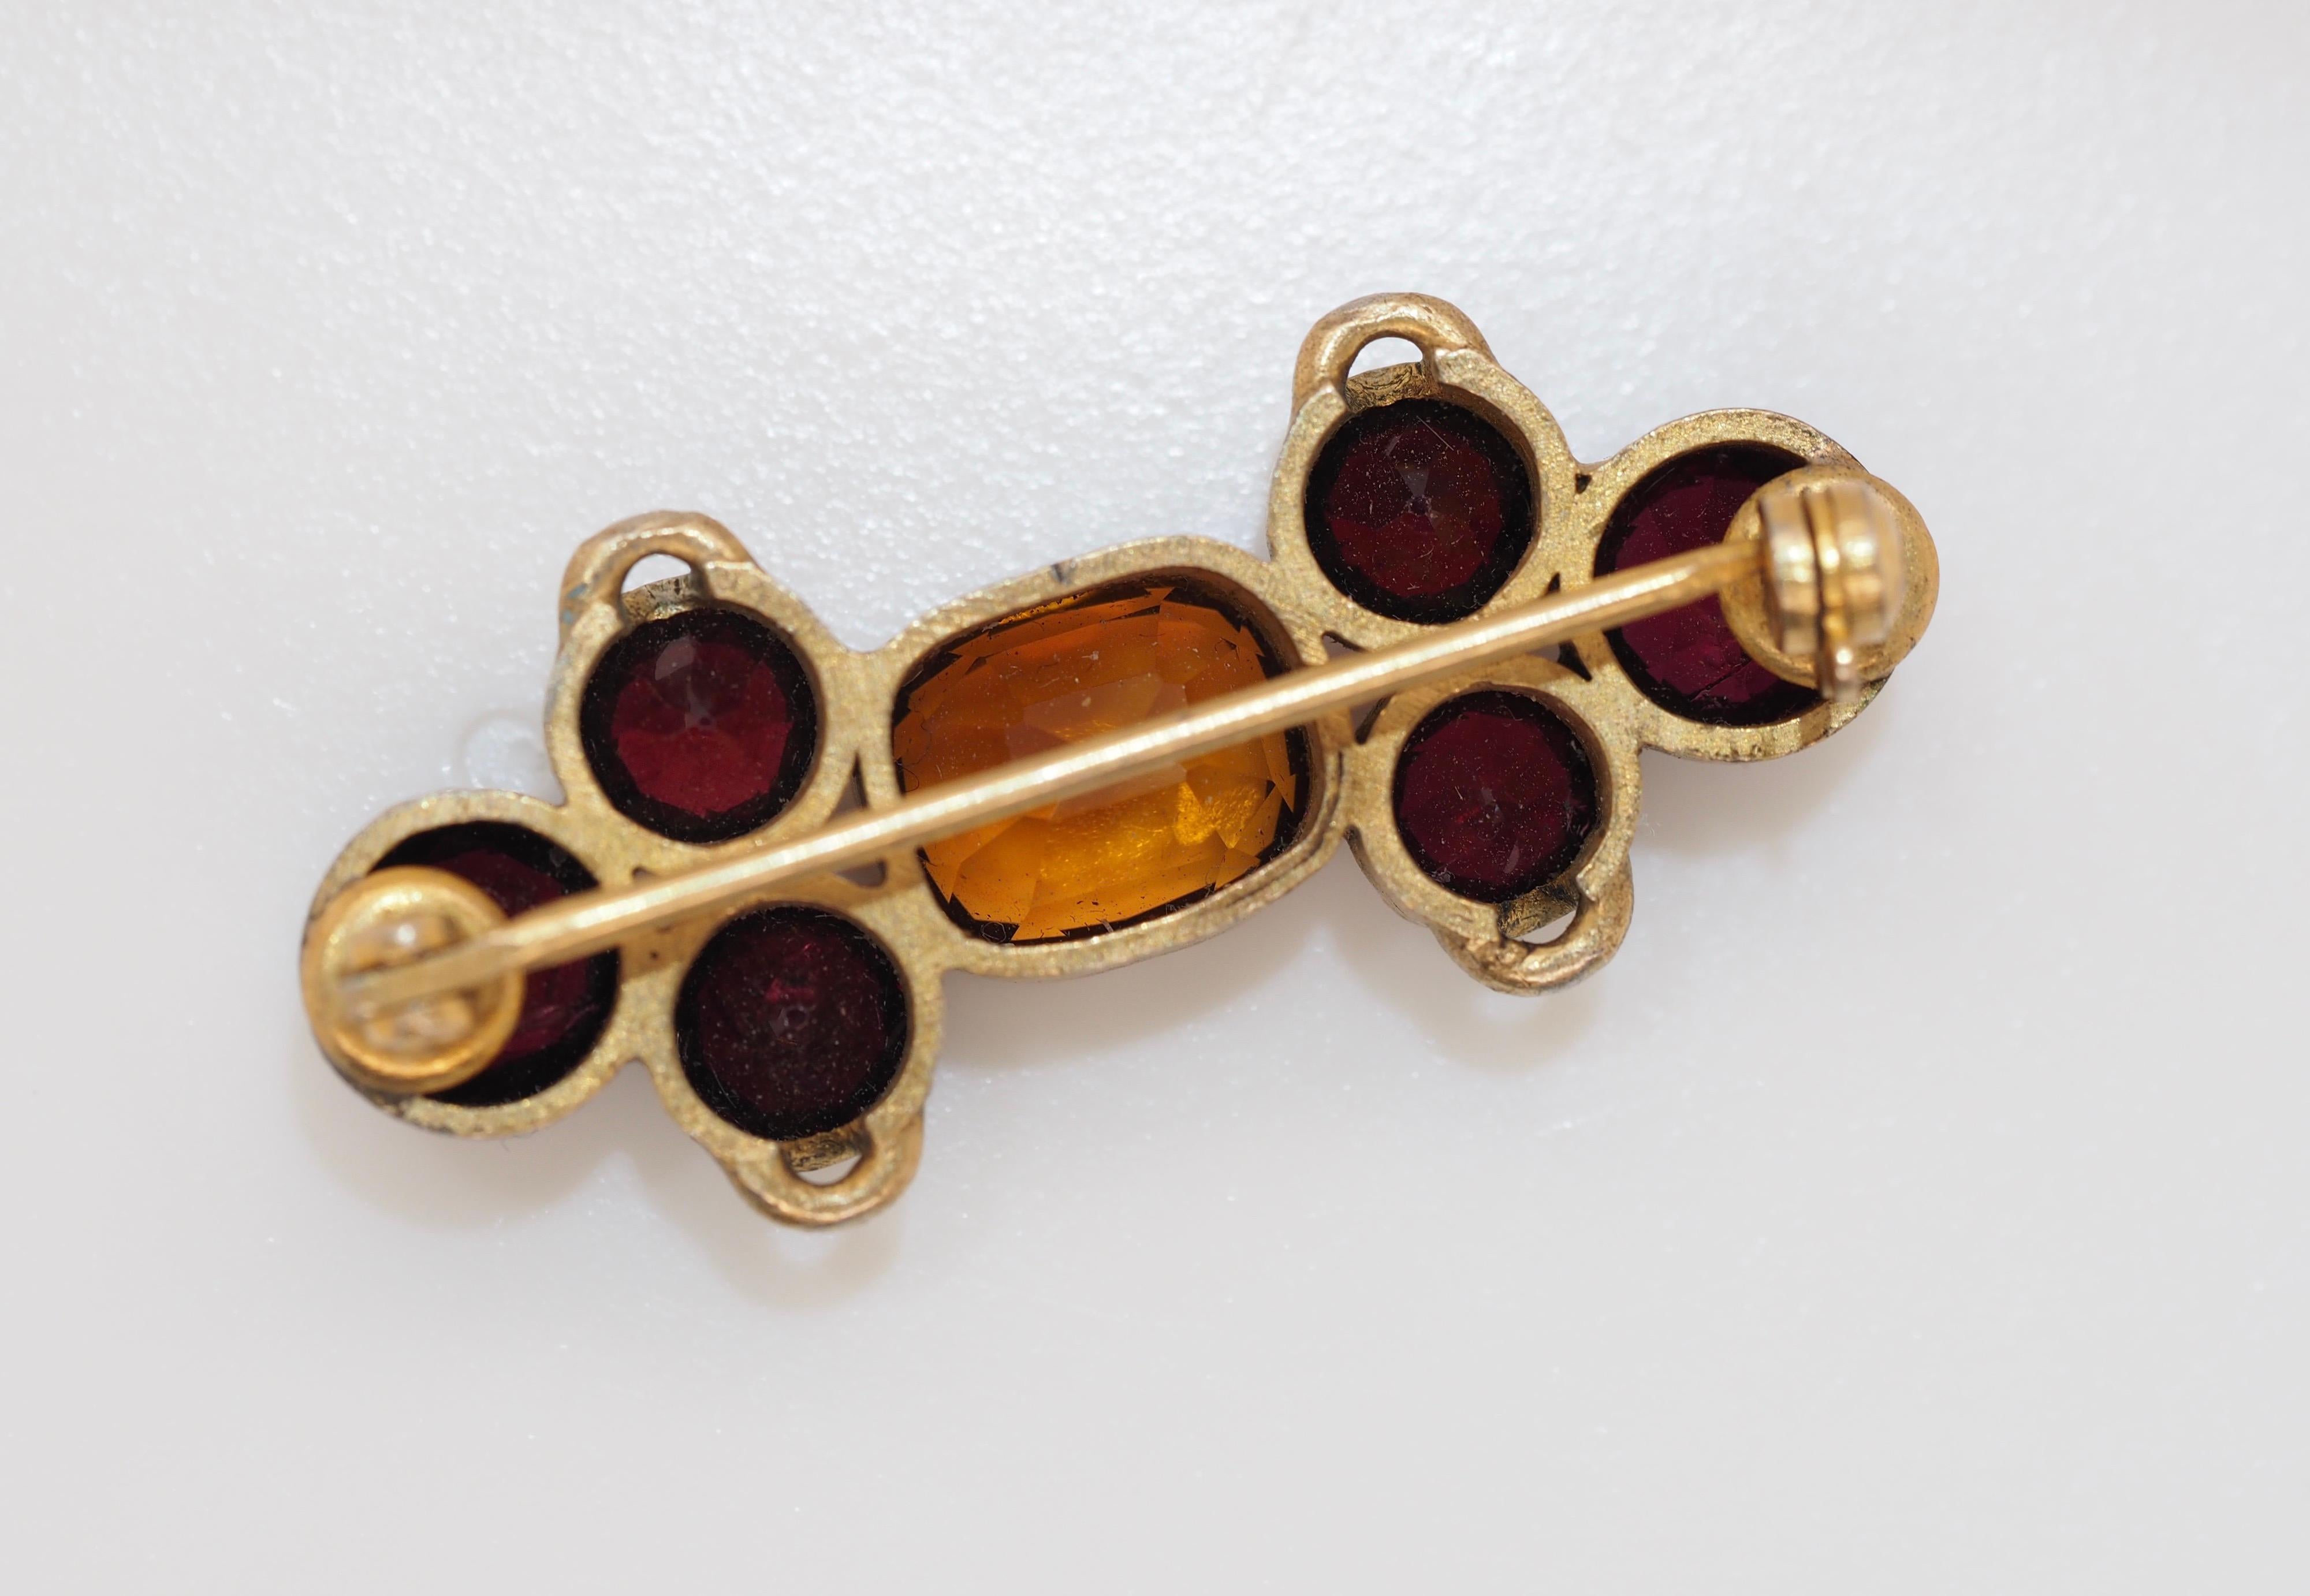 Oval Cut Retro Gold-Plated Brooch/Sliding Pendant with Citrine and Rhodolite Garnets